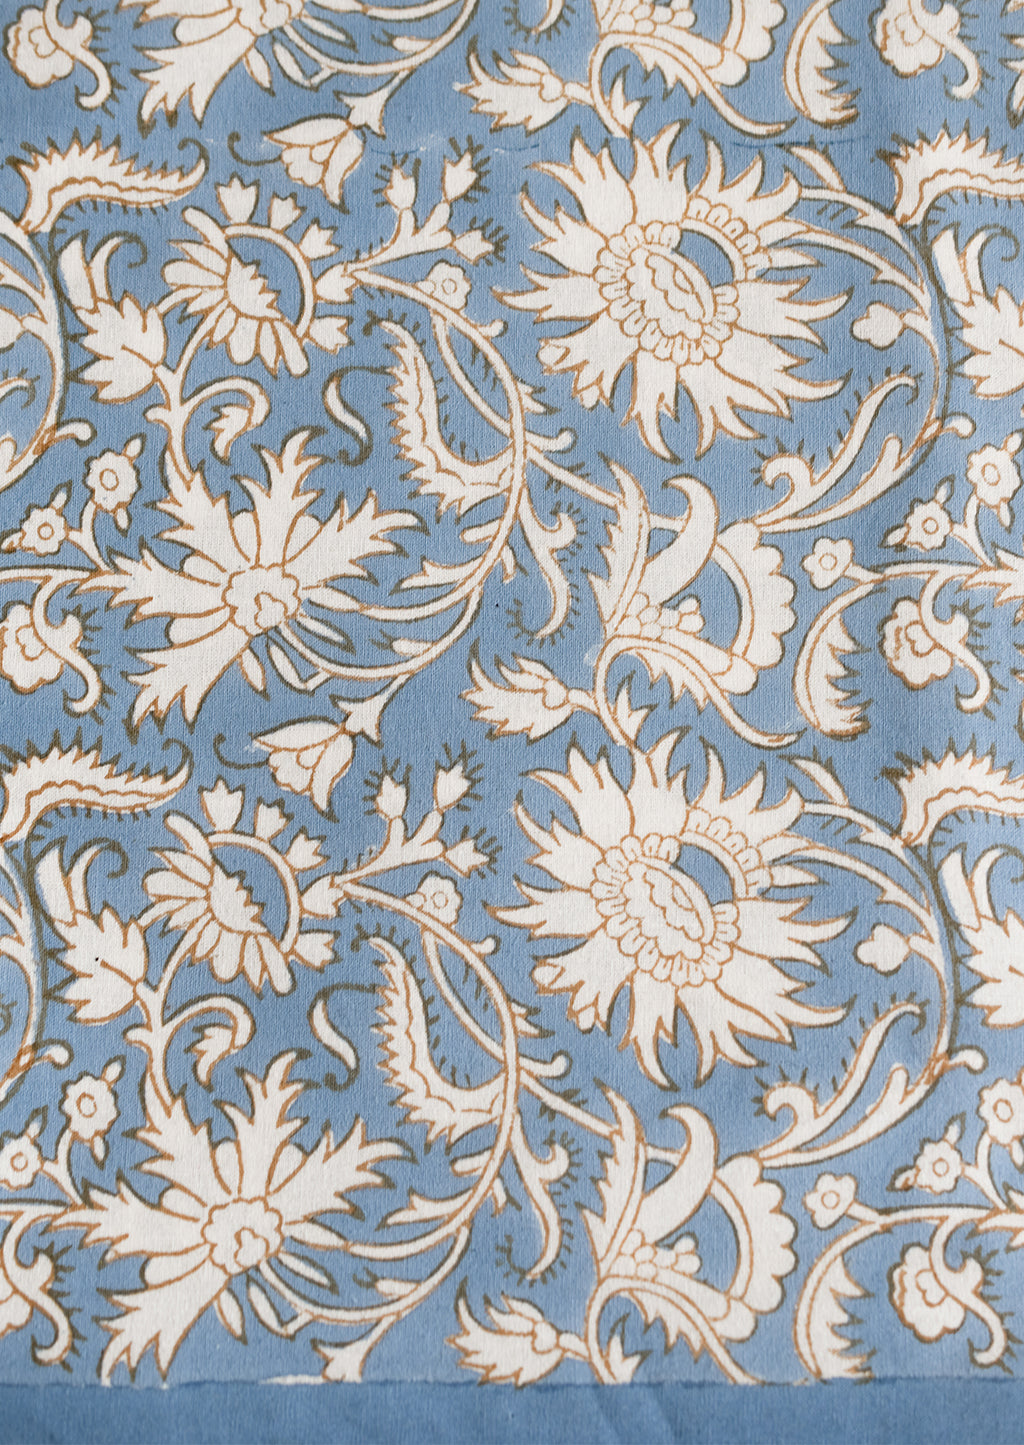 French Blue / Brown: A block print tablecloth in sky blue with white and brown floral print.